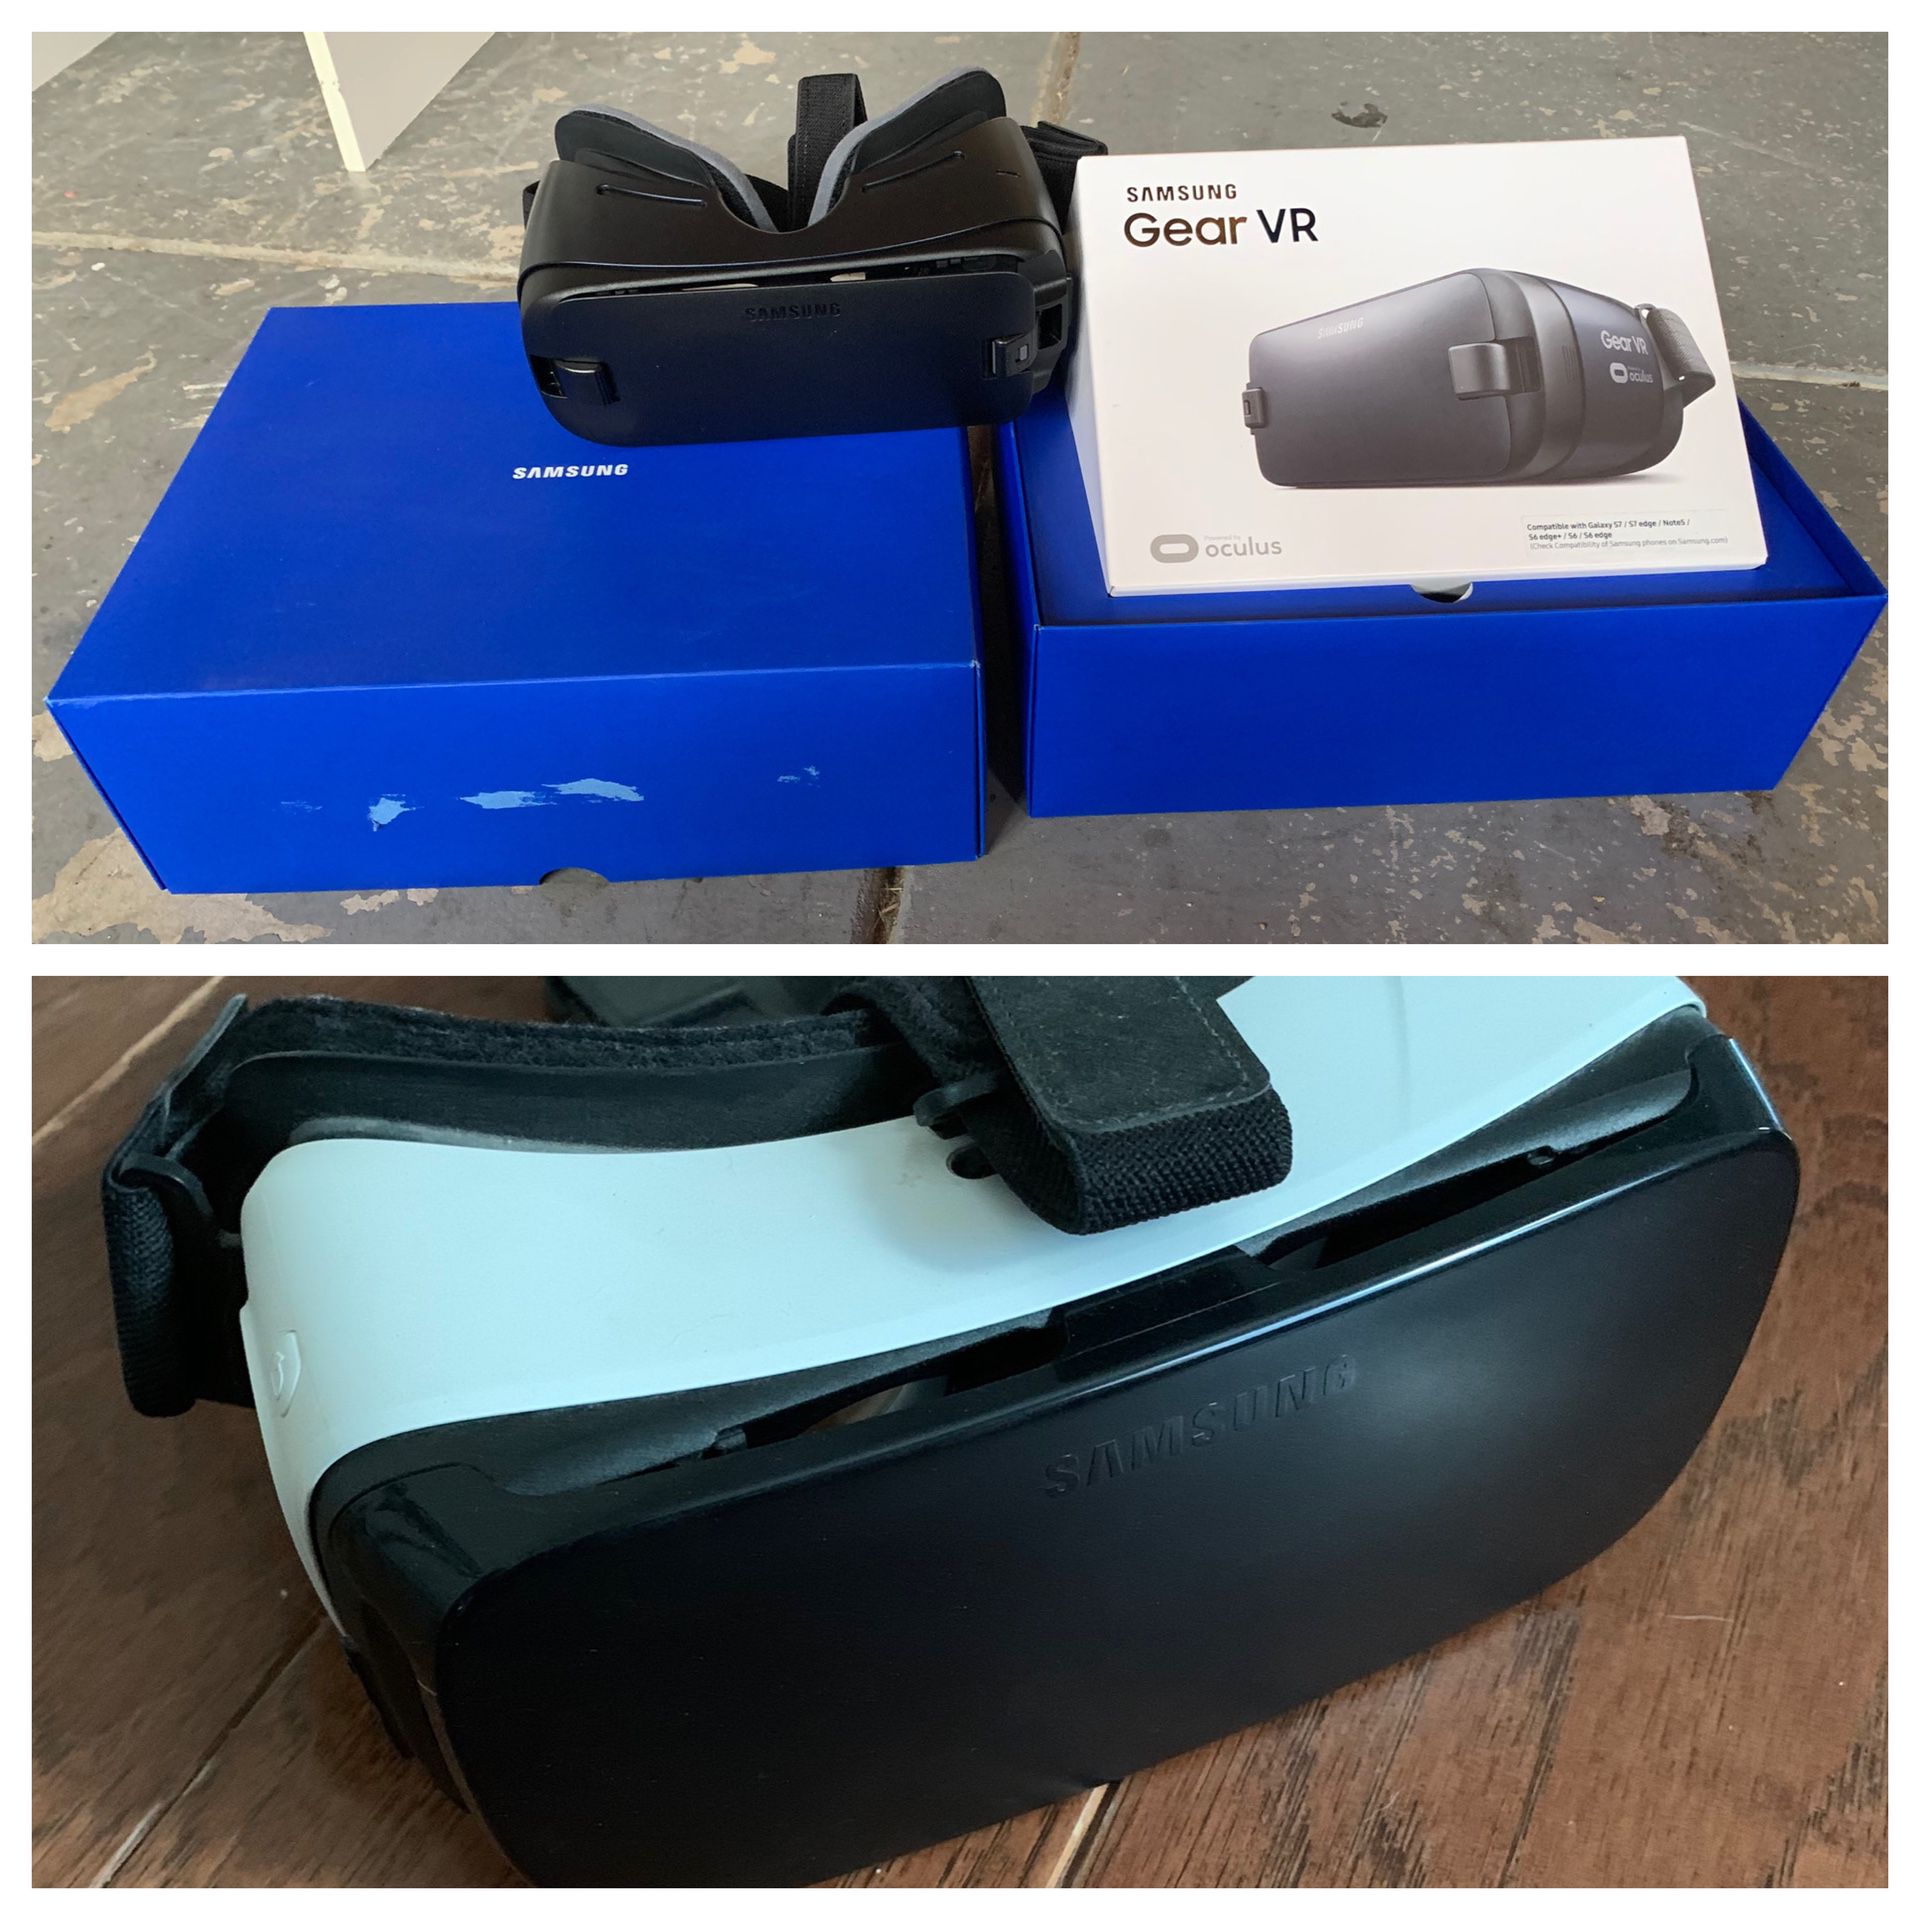 Samsung Gear VR Headsets (2) for Galaxy S7